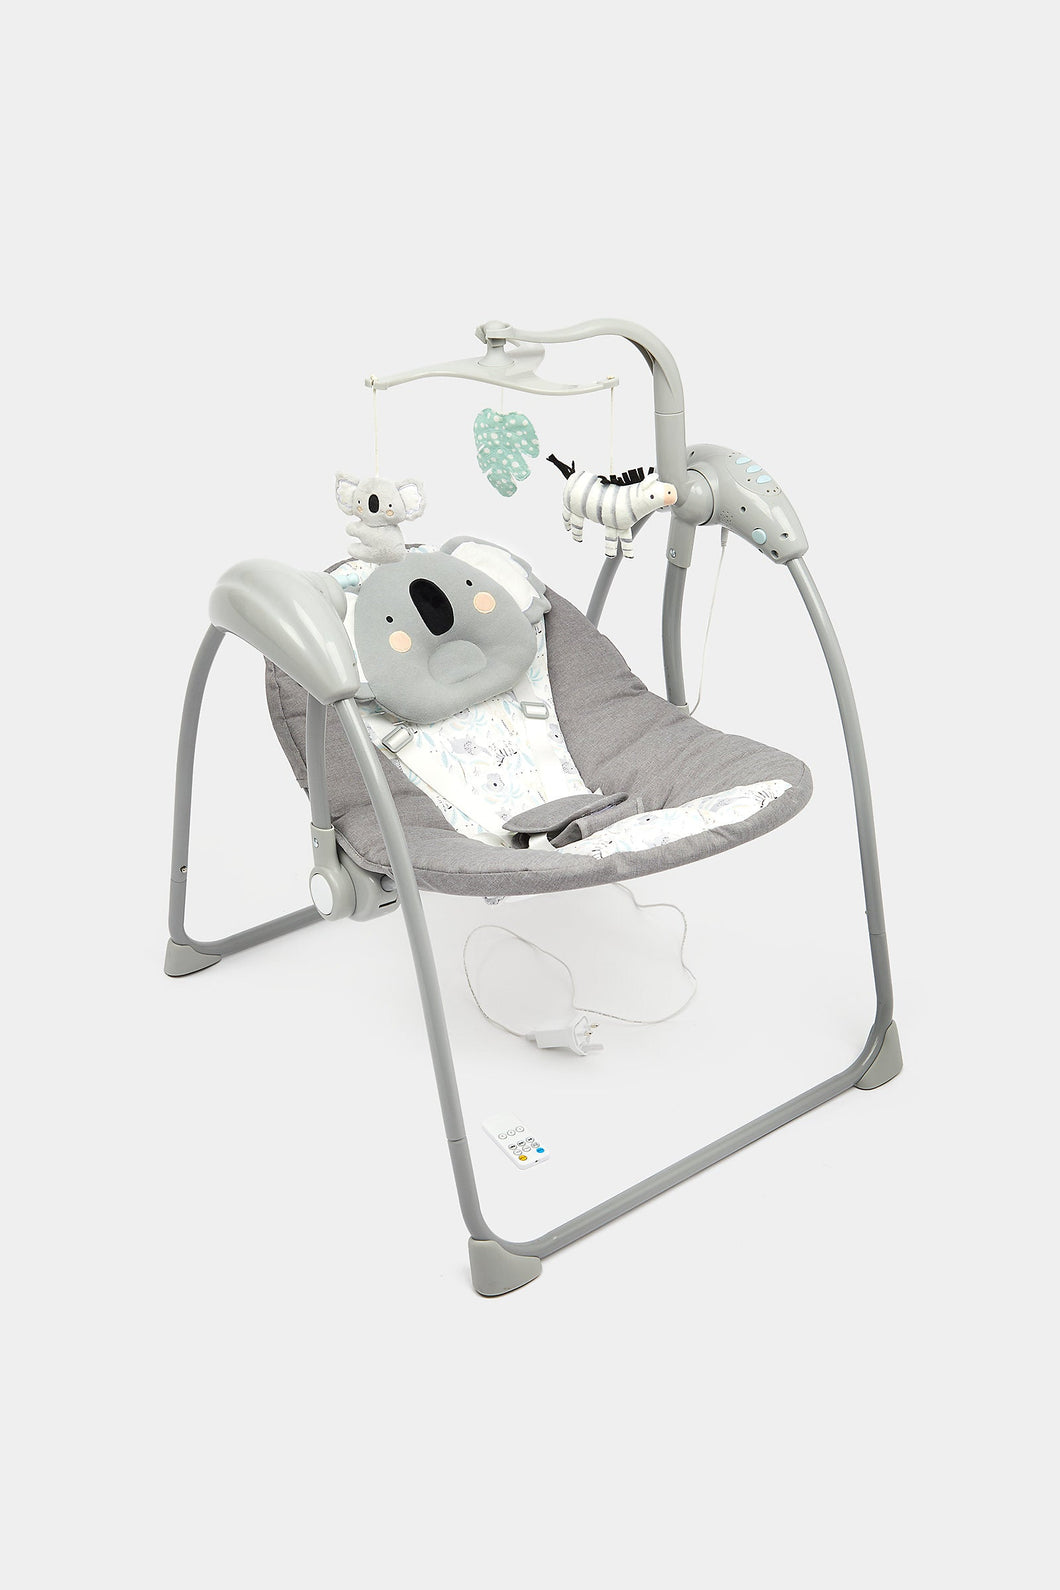 FREE GIFT -  Mothercare Koala Swing with Bluetooth  (Worth $1,100)